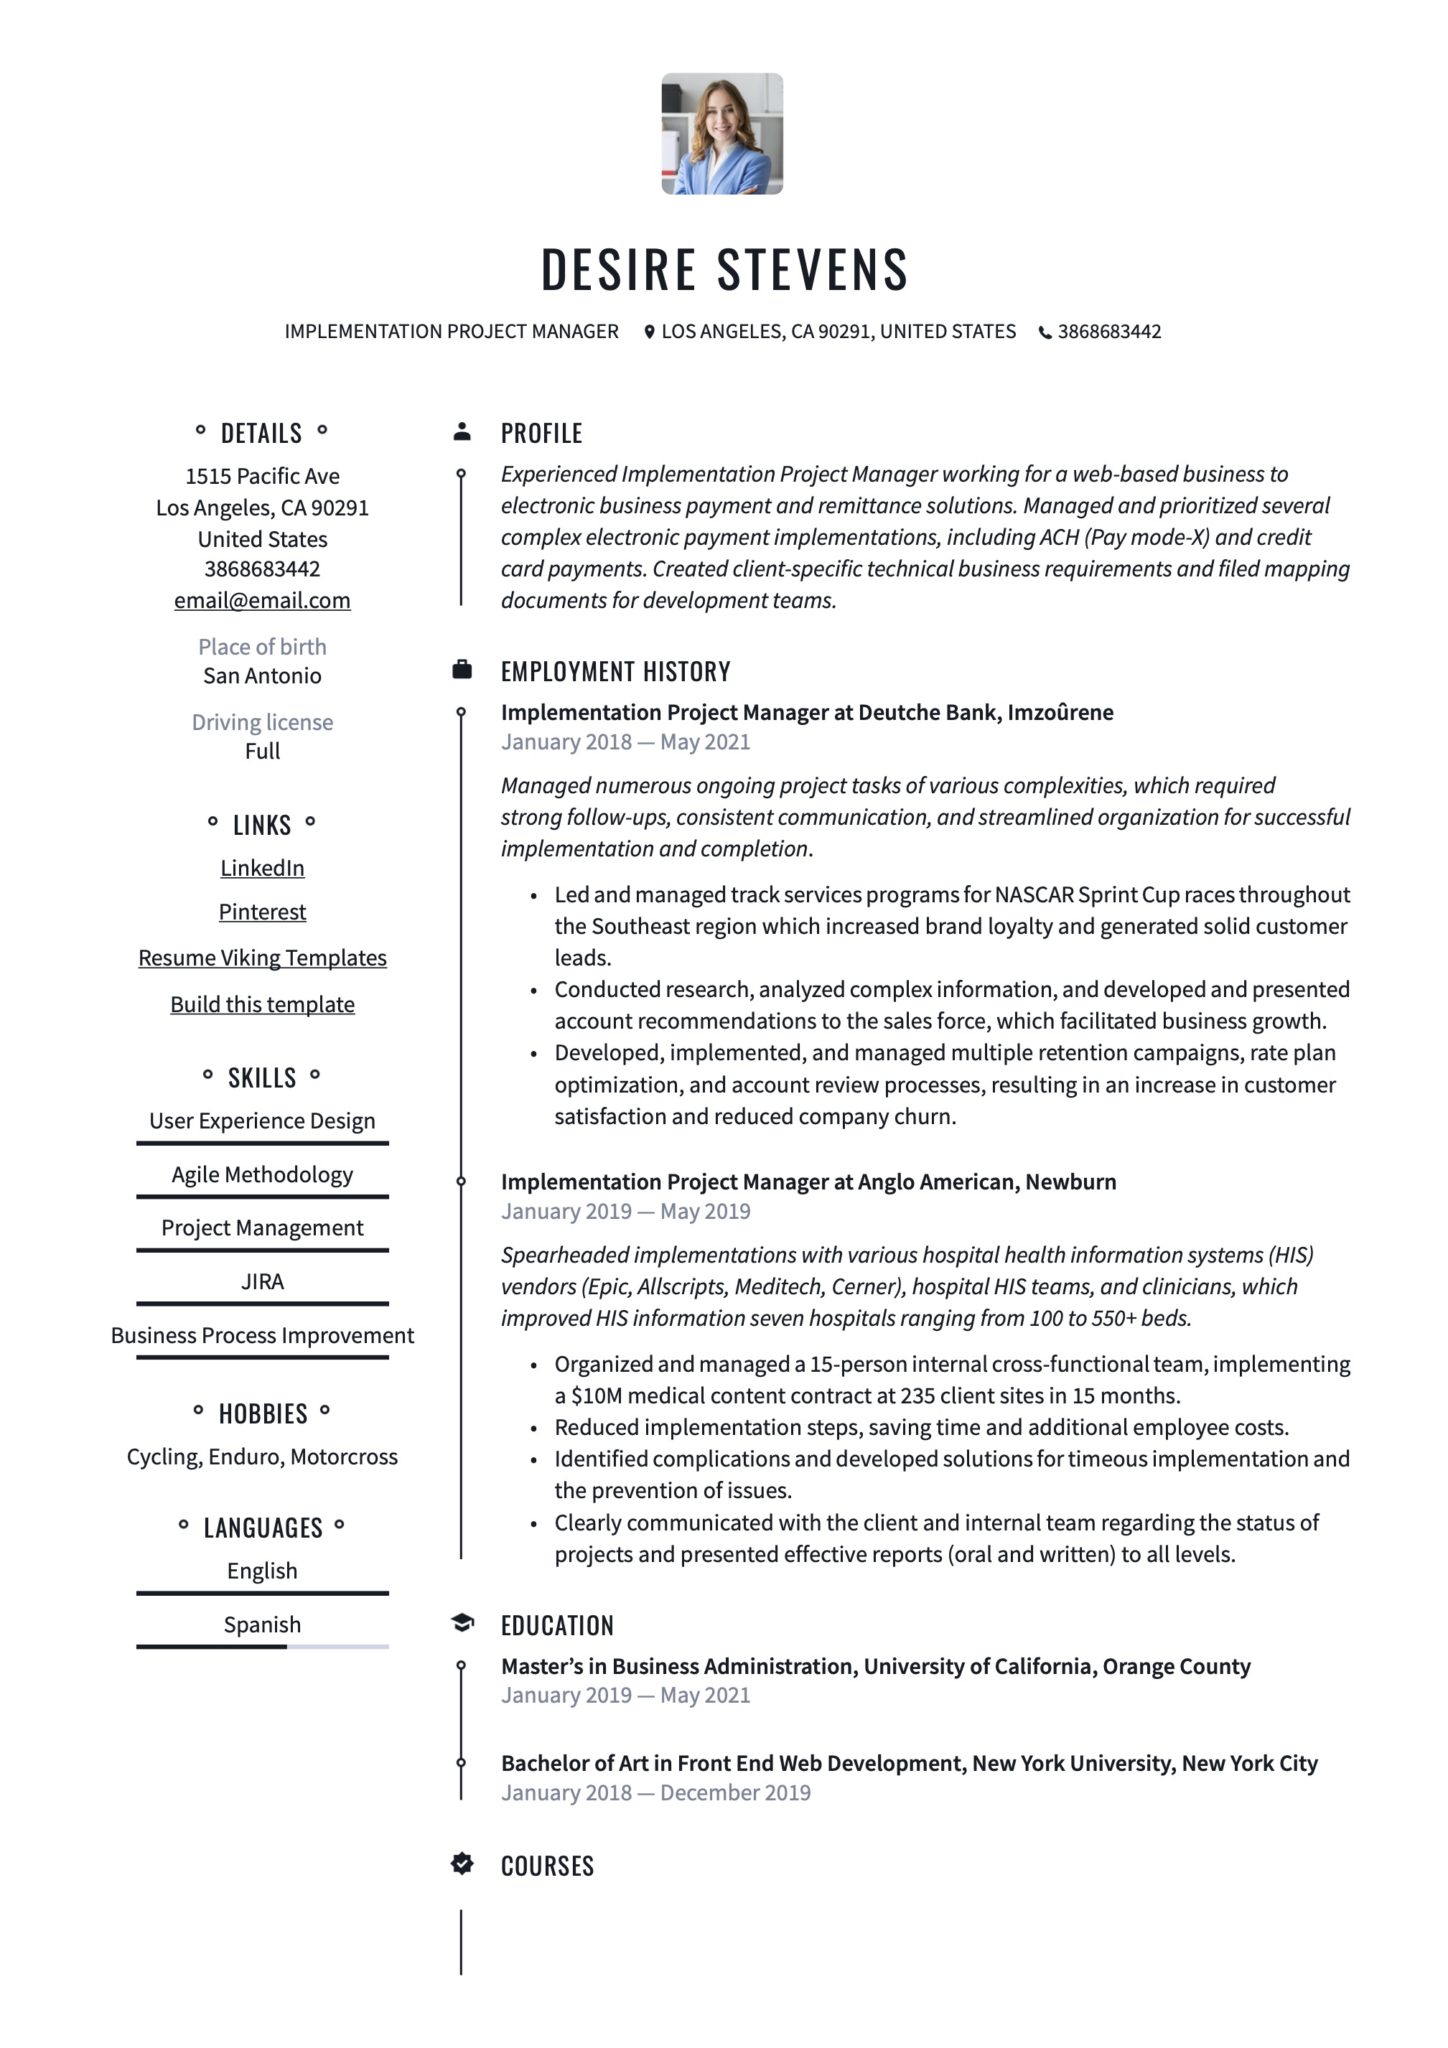 Professional Implementation Project Manager Resume Example